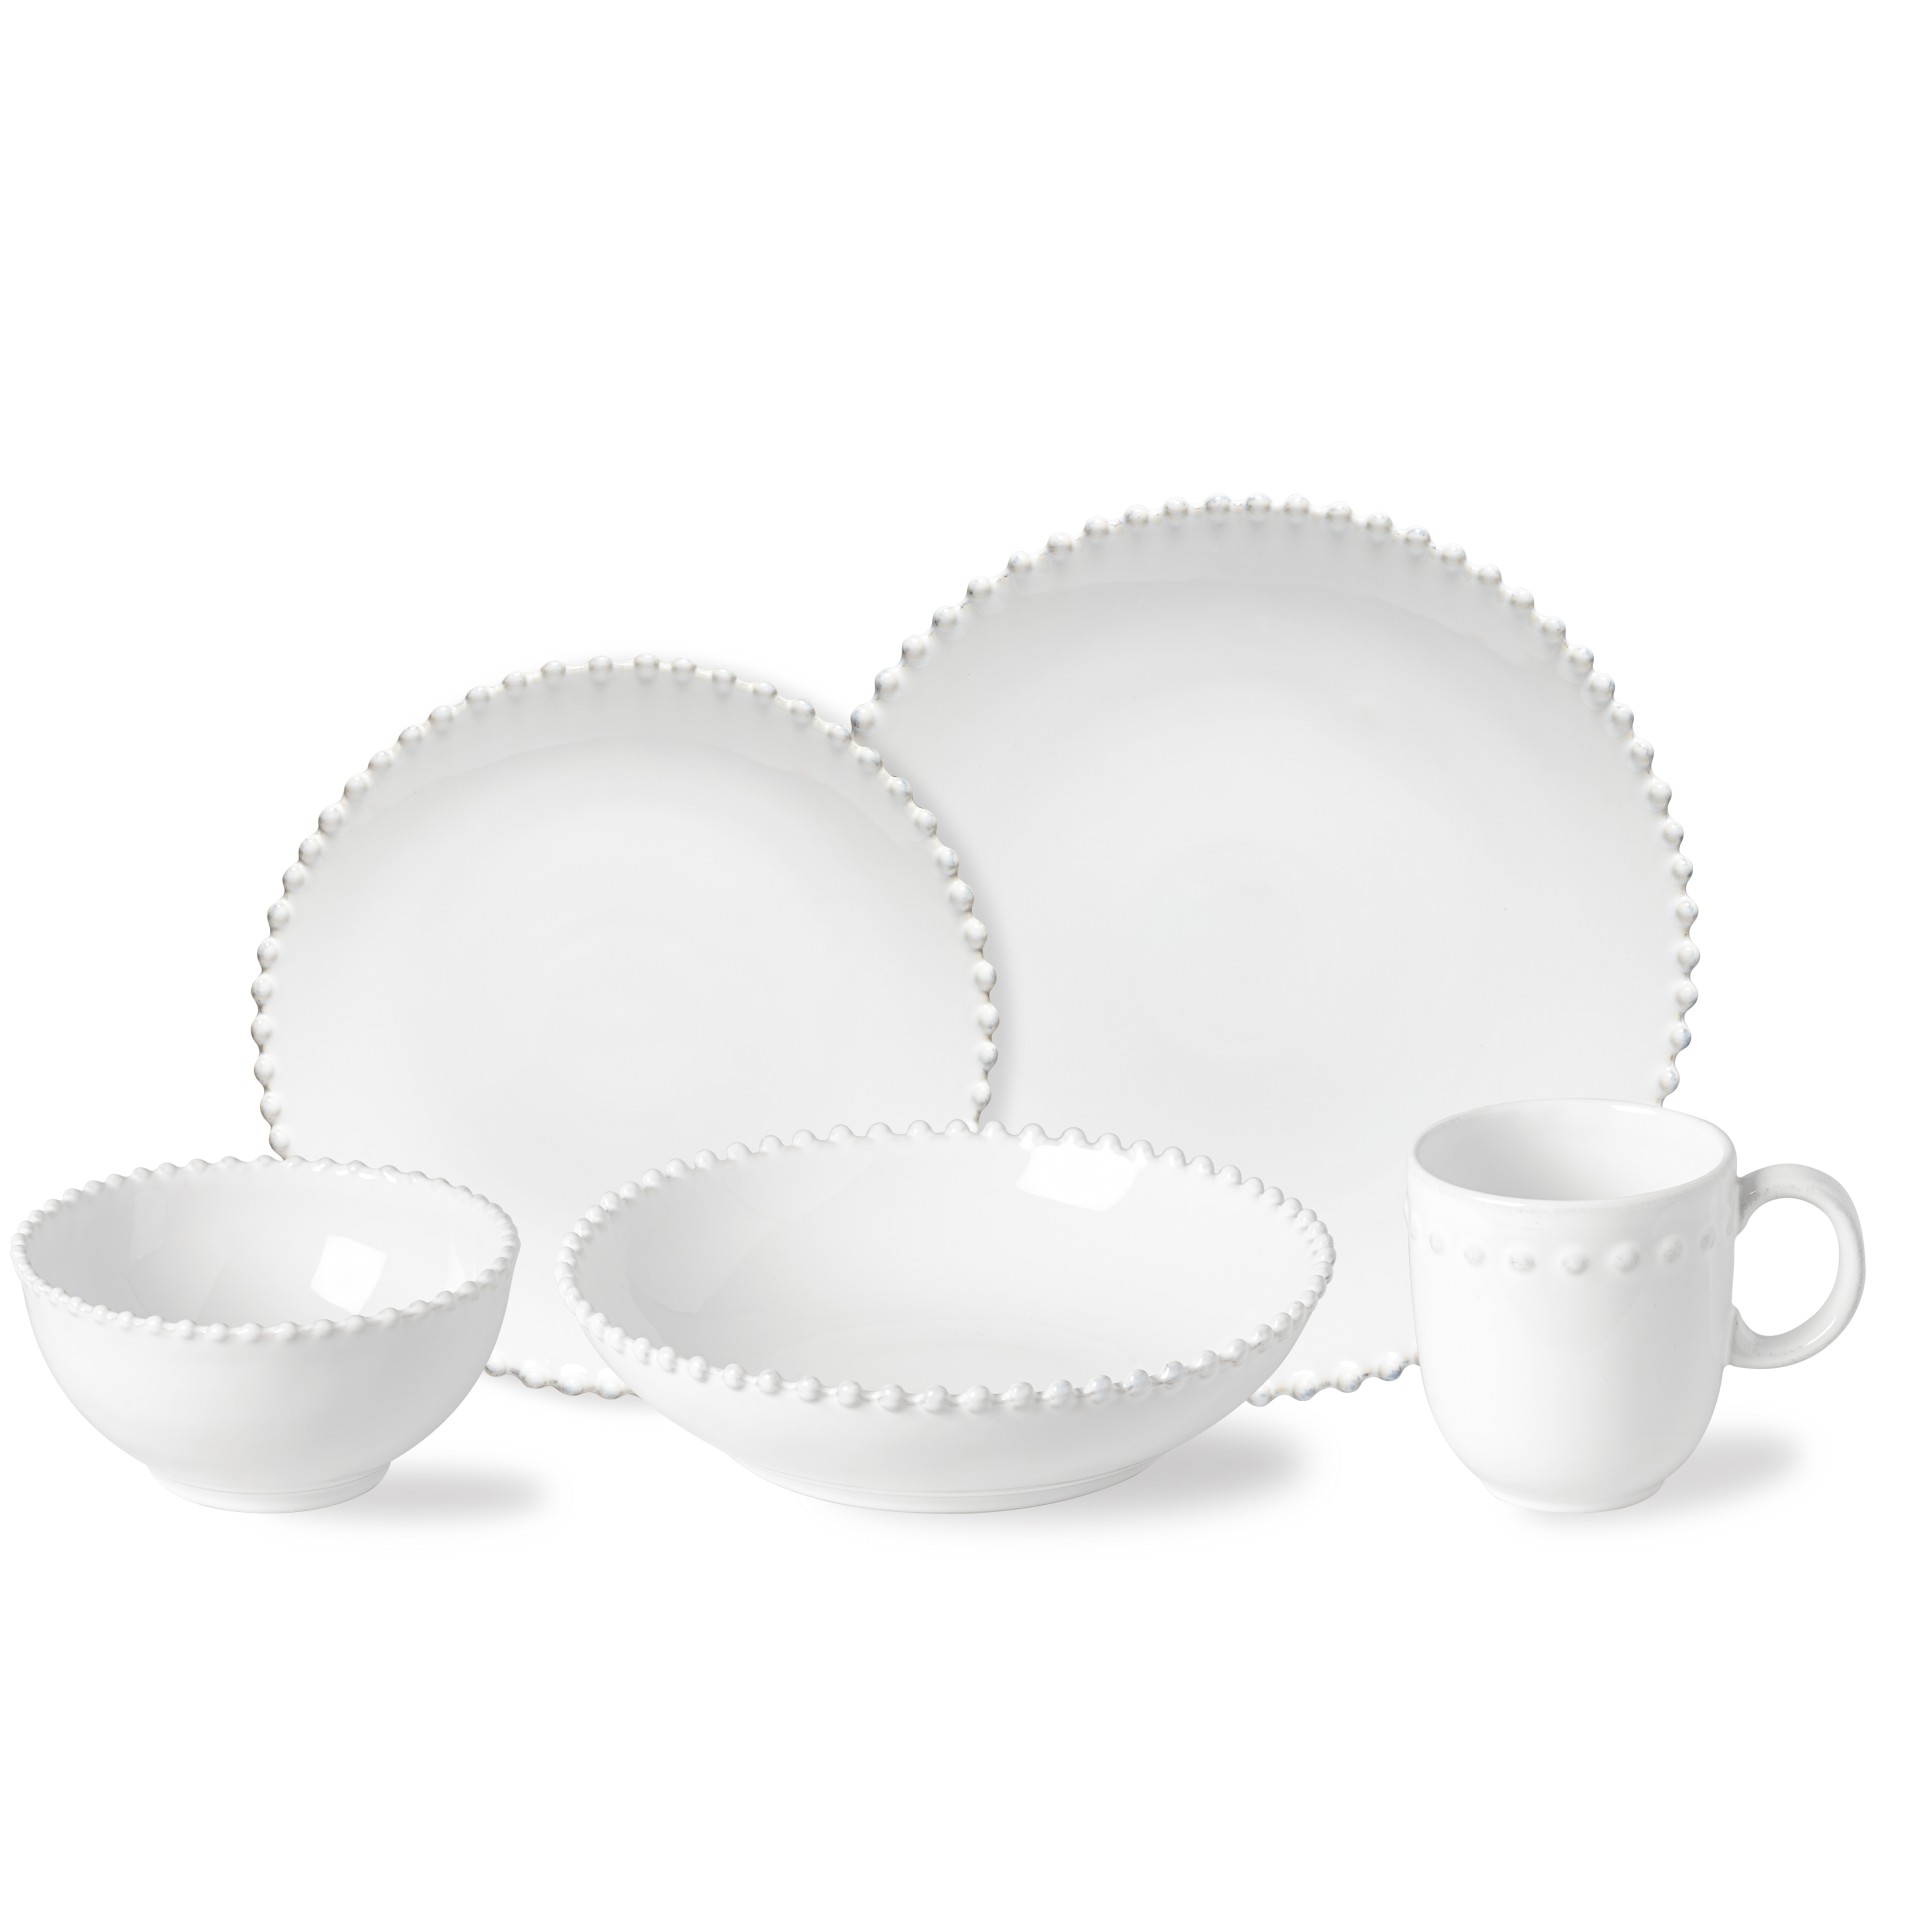 30 Piece Place Setting with Bowl Pearl